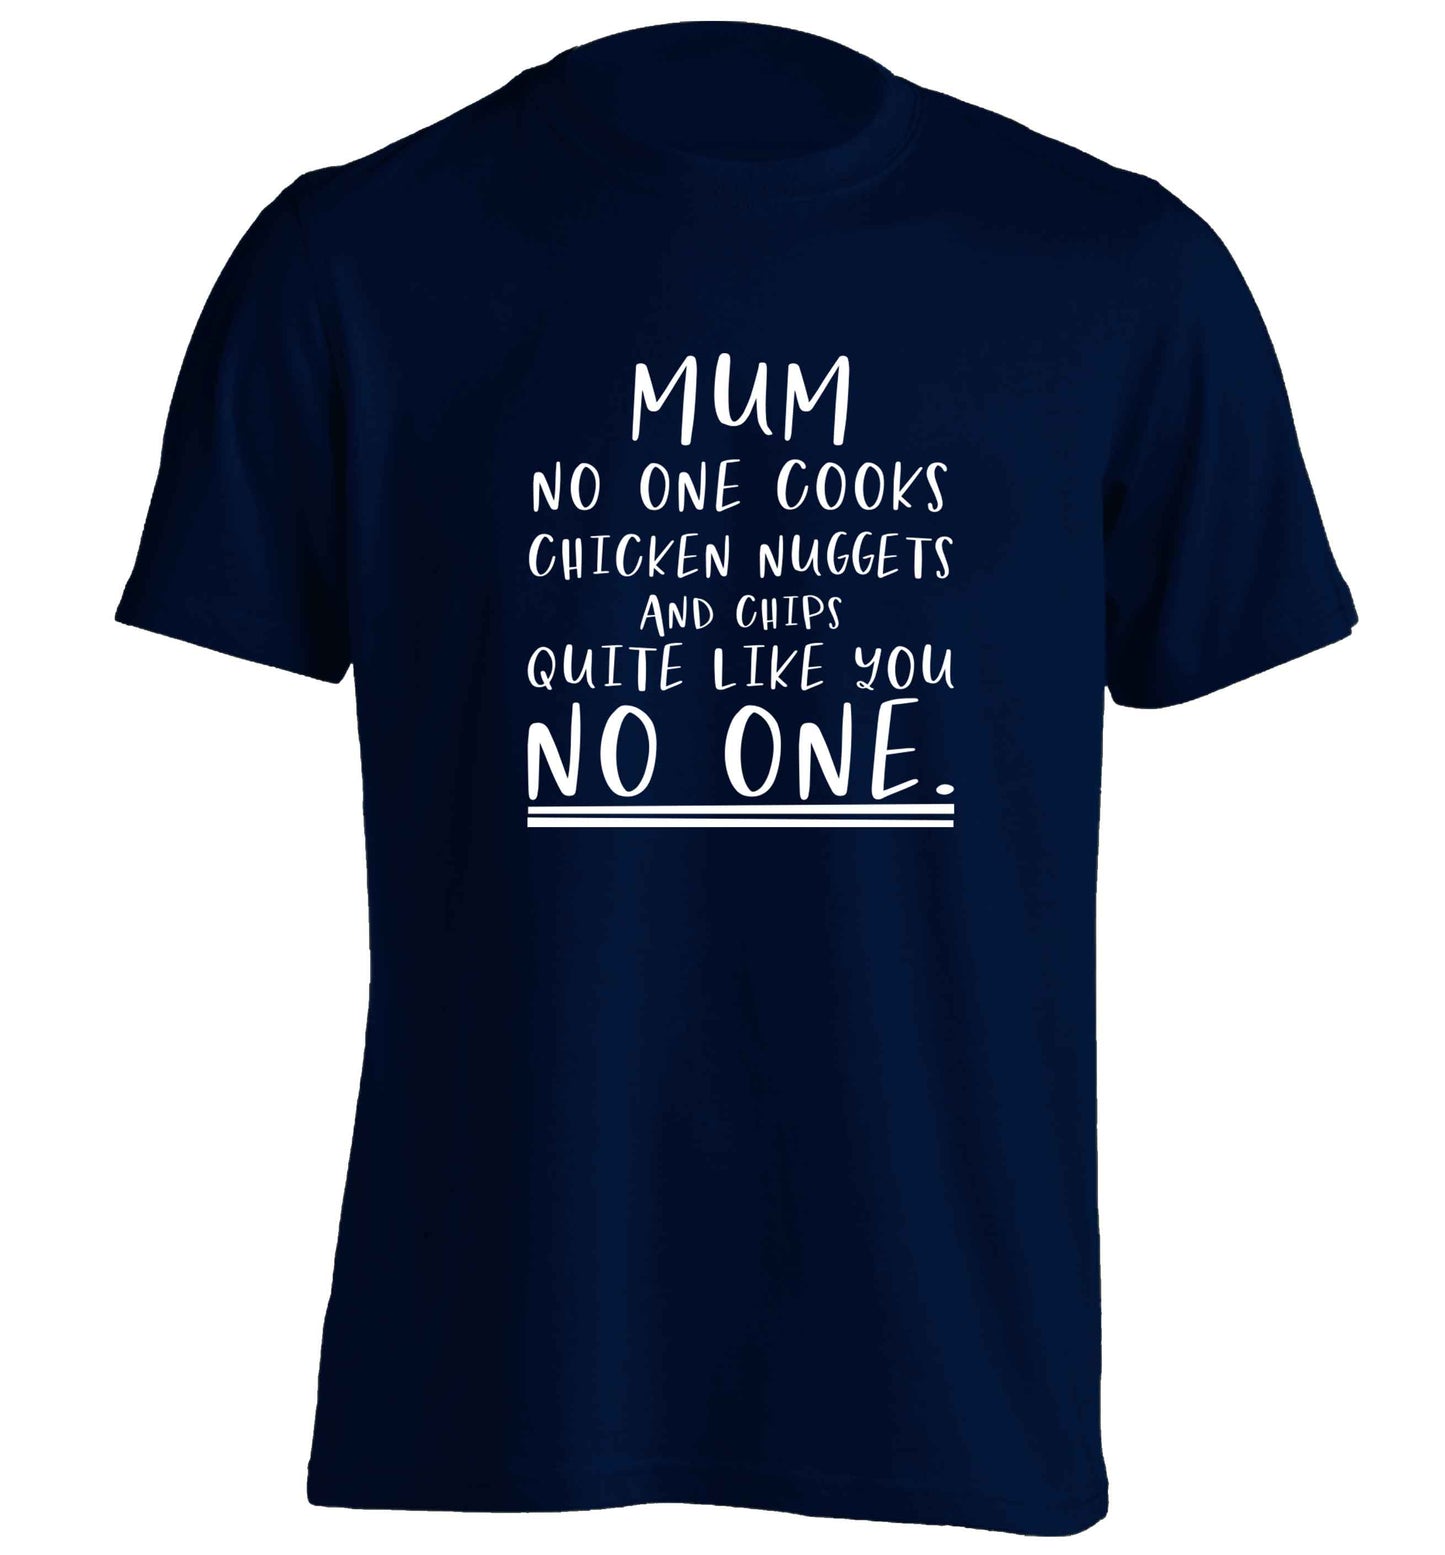 Super funny sassy gift for mother's day or birthday!  Mum no one cooks chicken nuggets and chips like you no one adults unisex navy Tshirt 2XL